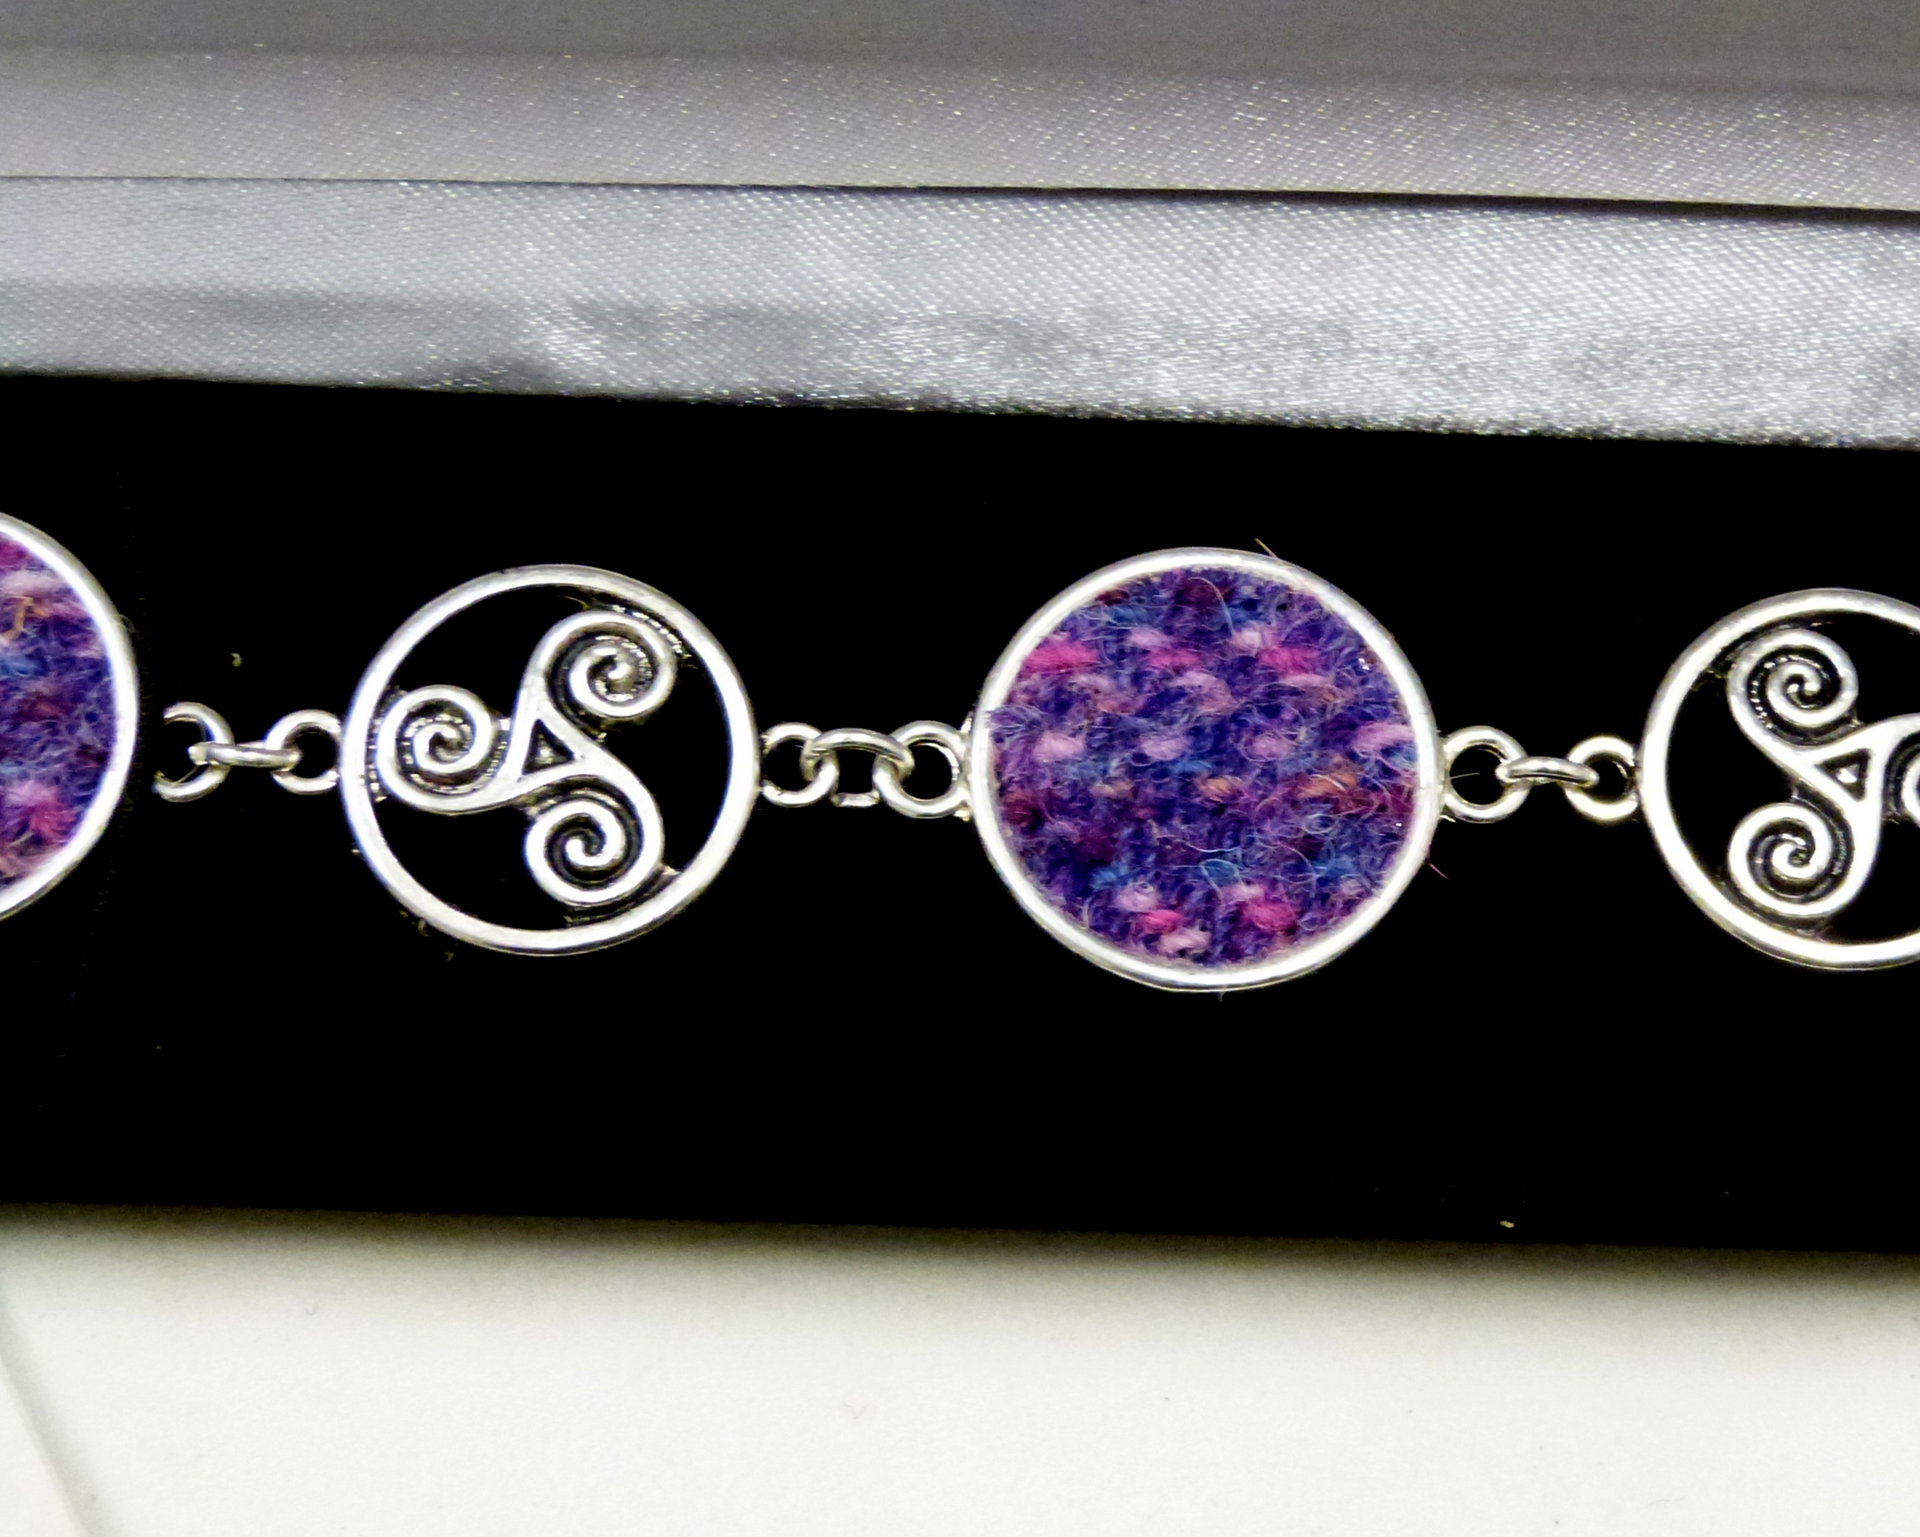 Purple / pink Harris Tweed bracelet with celtic triple spiral feature, triskeles , made in Scotland , Christmas or birthday gift womens or bridesmaid jewellery